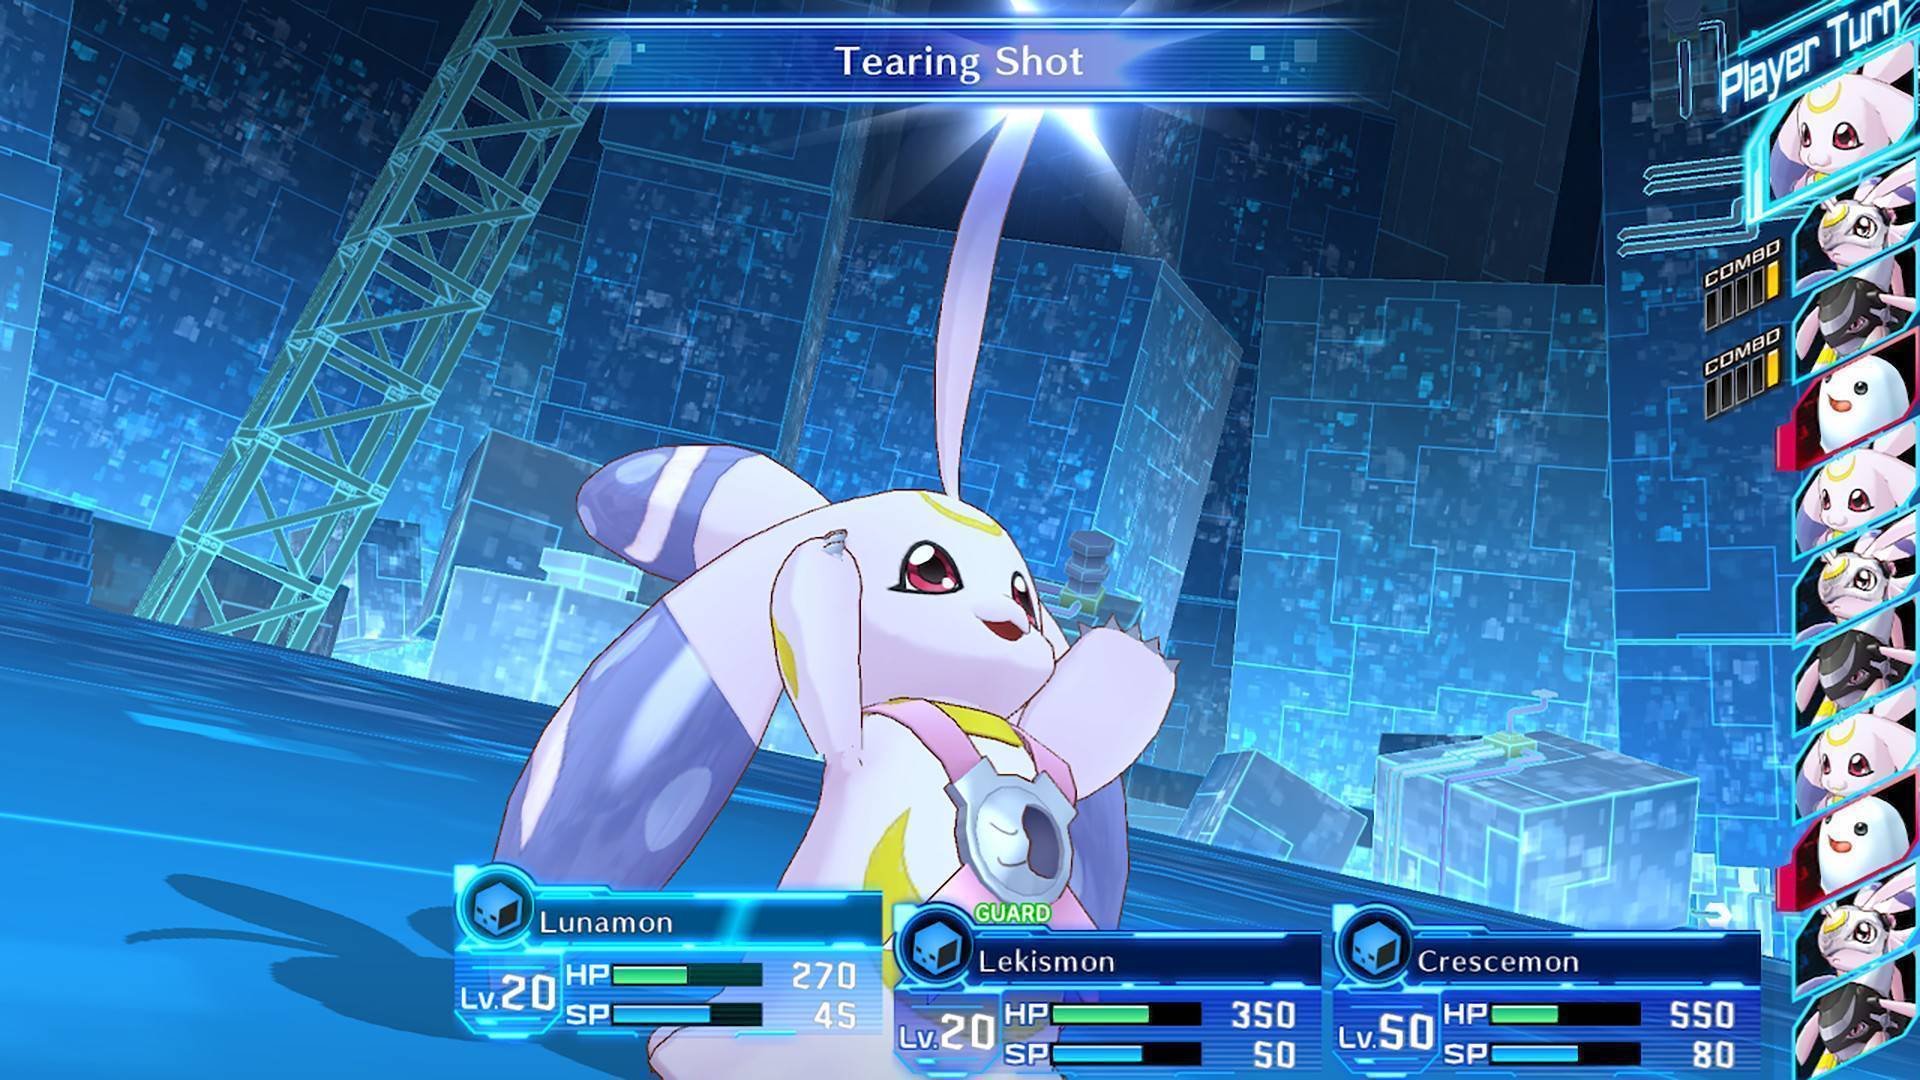 Story Cyber Sleuth (PS4) cheap - Price $10.48